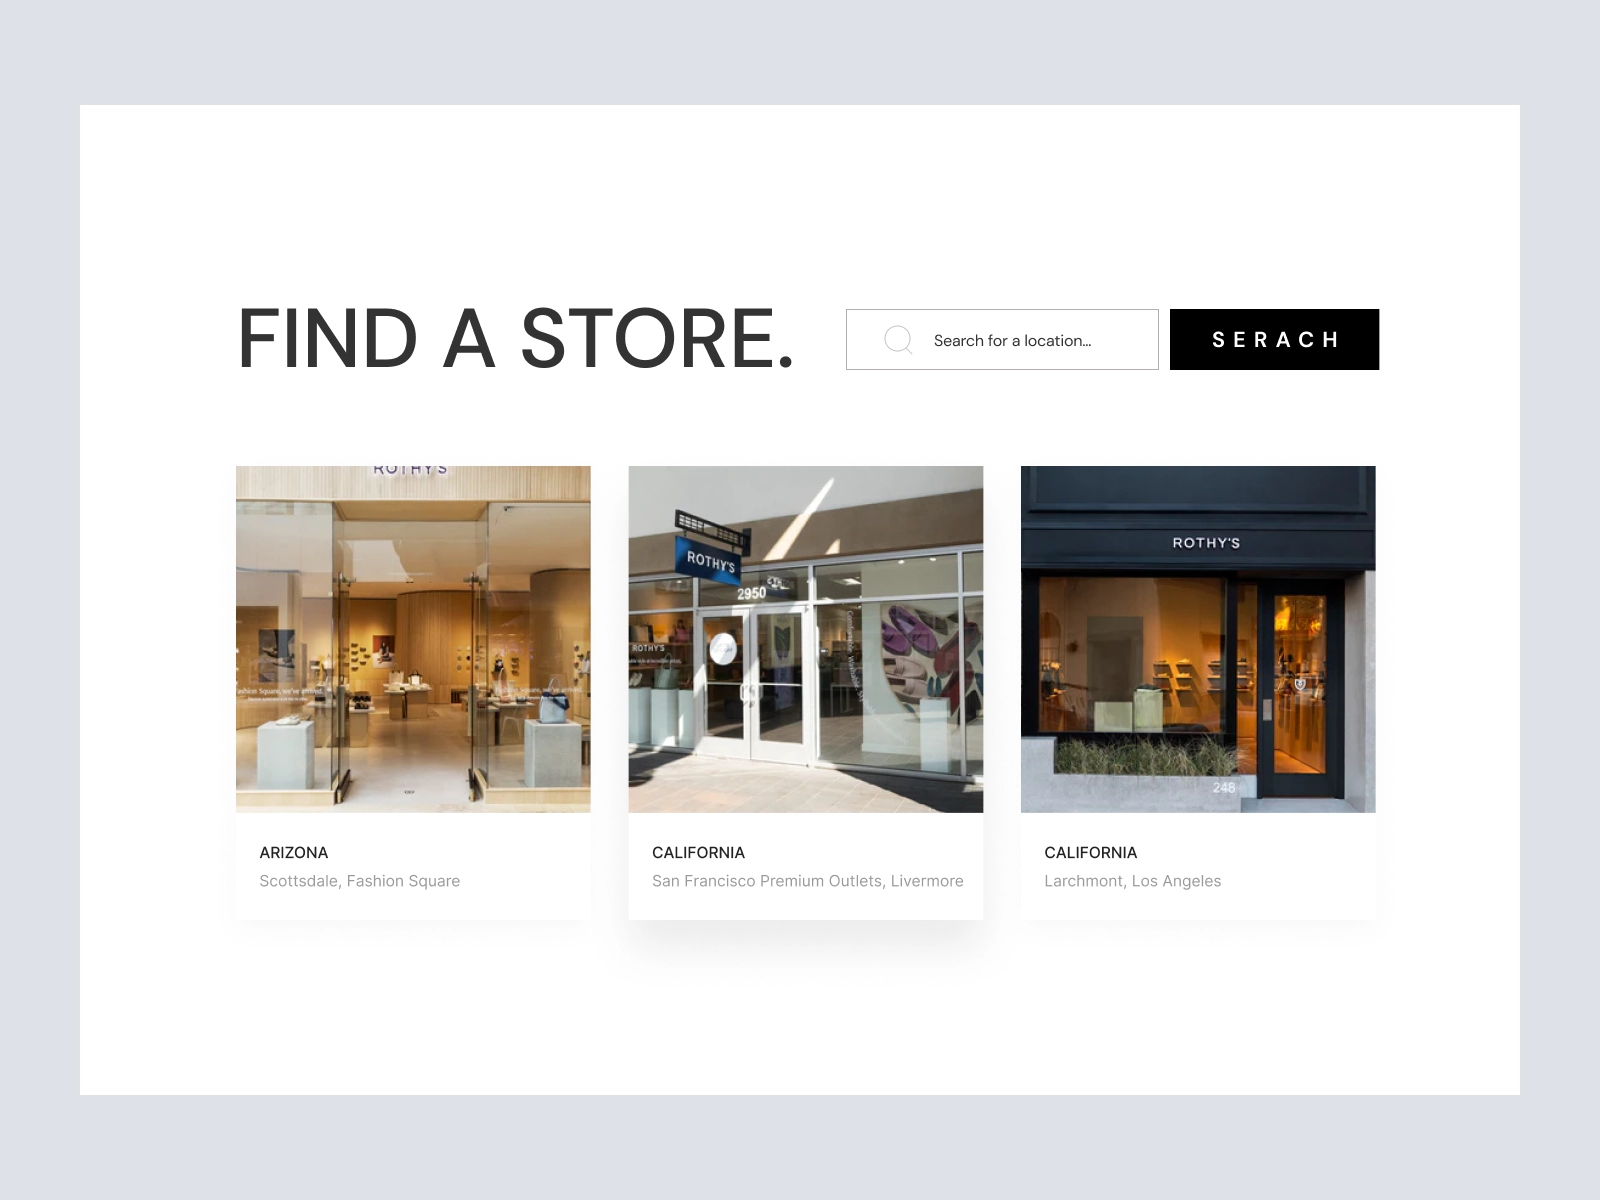 Rothy's - Women Fashion Store for Figma and Adobe XD - screen 5